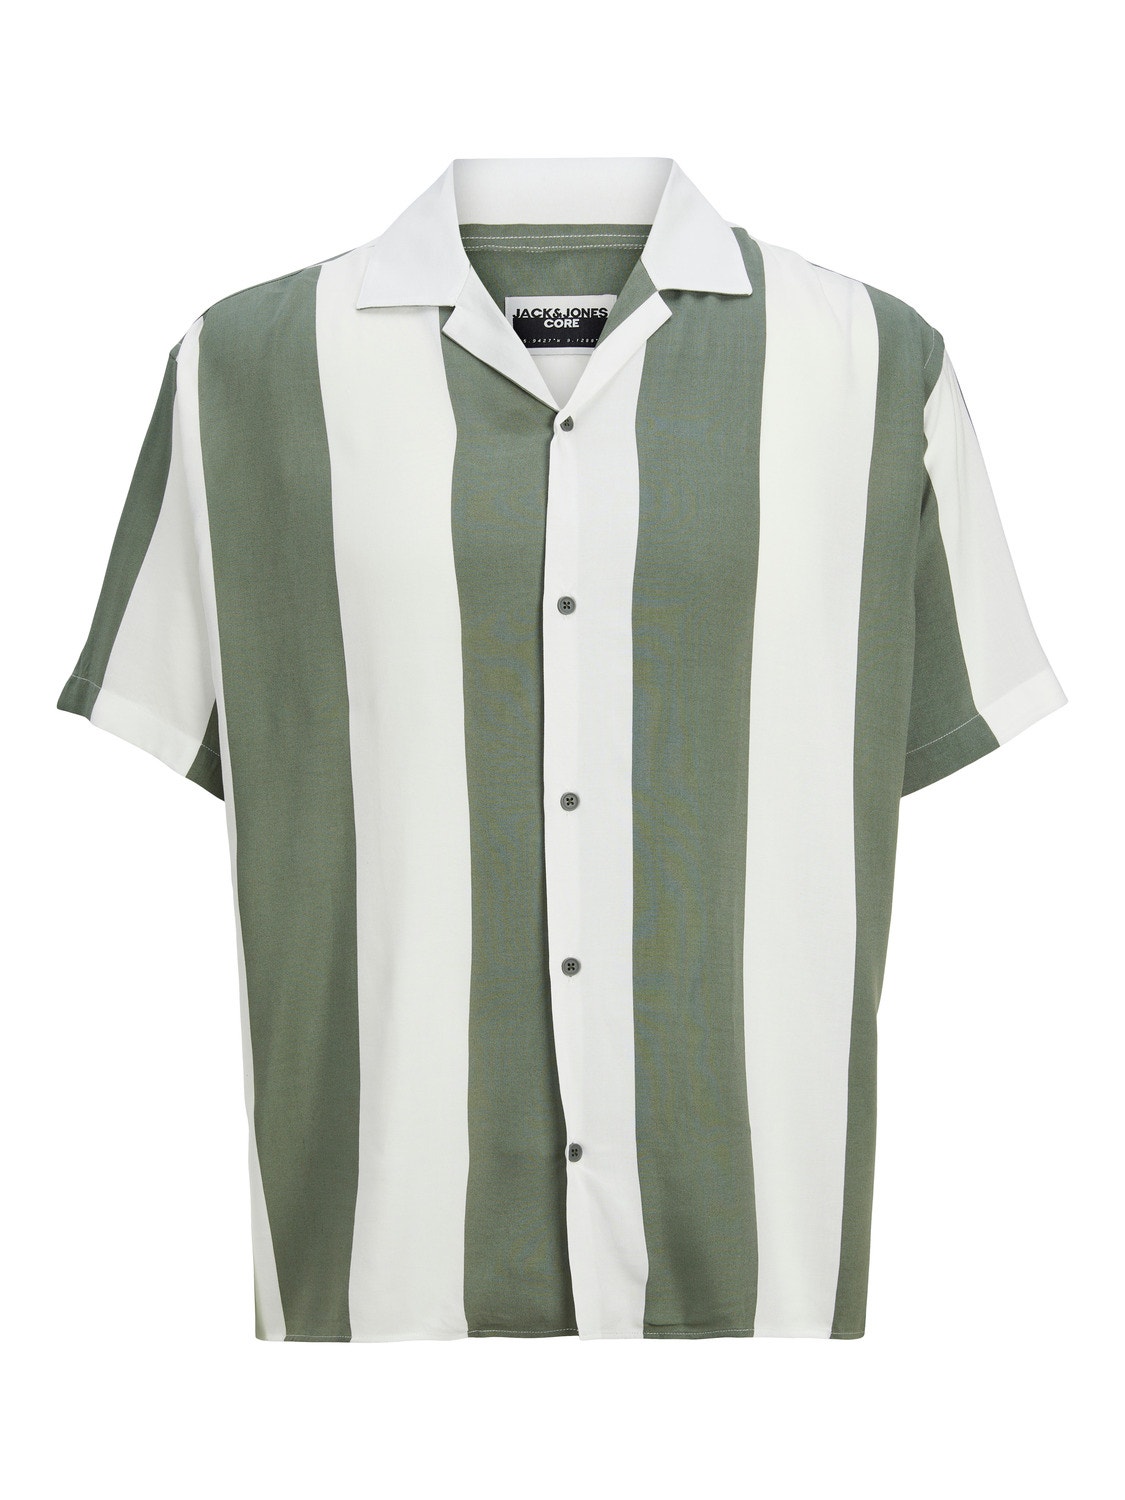 Jack & Jones Stile Hawaiano Relaxed Fit -Agave Green - 12252536